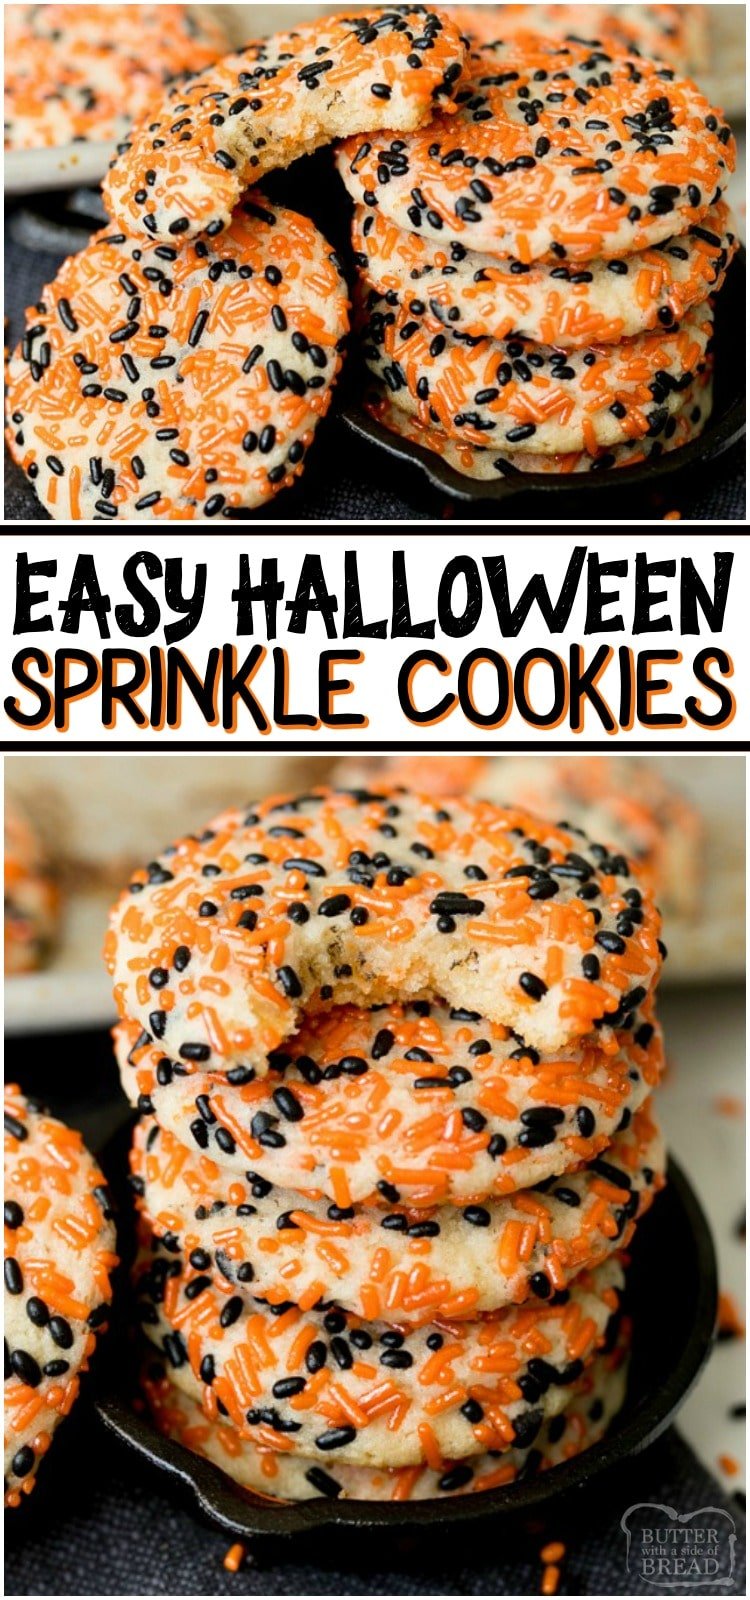 Halloween Sprinkle Cookies are a festive & sweet way to celebrate Halloween! Soft, easy Halloween cookie recipe covered in orange and black sprinkles then baked to cookie perfection. #cookies #sprinkles #Halloween #dessert #recipe from BUTTER WITH A SIDE OF BREAD